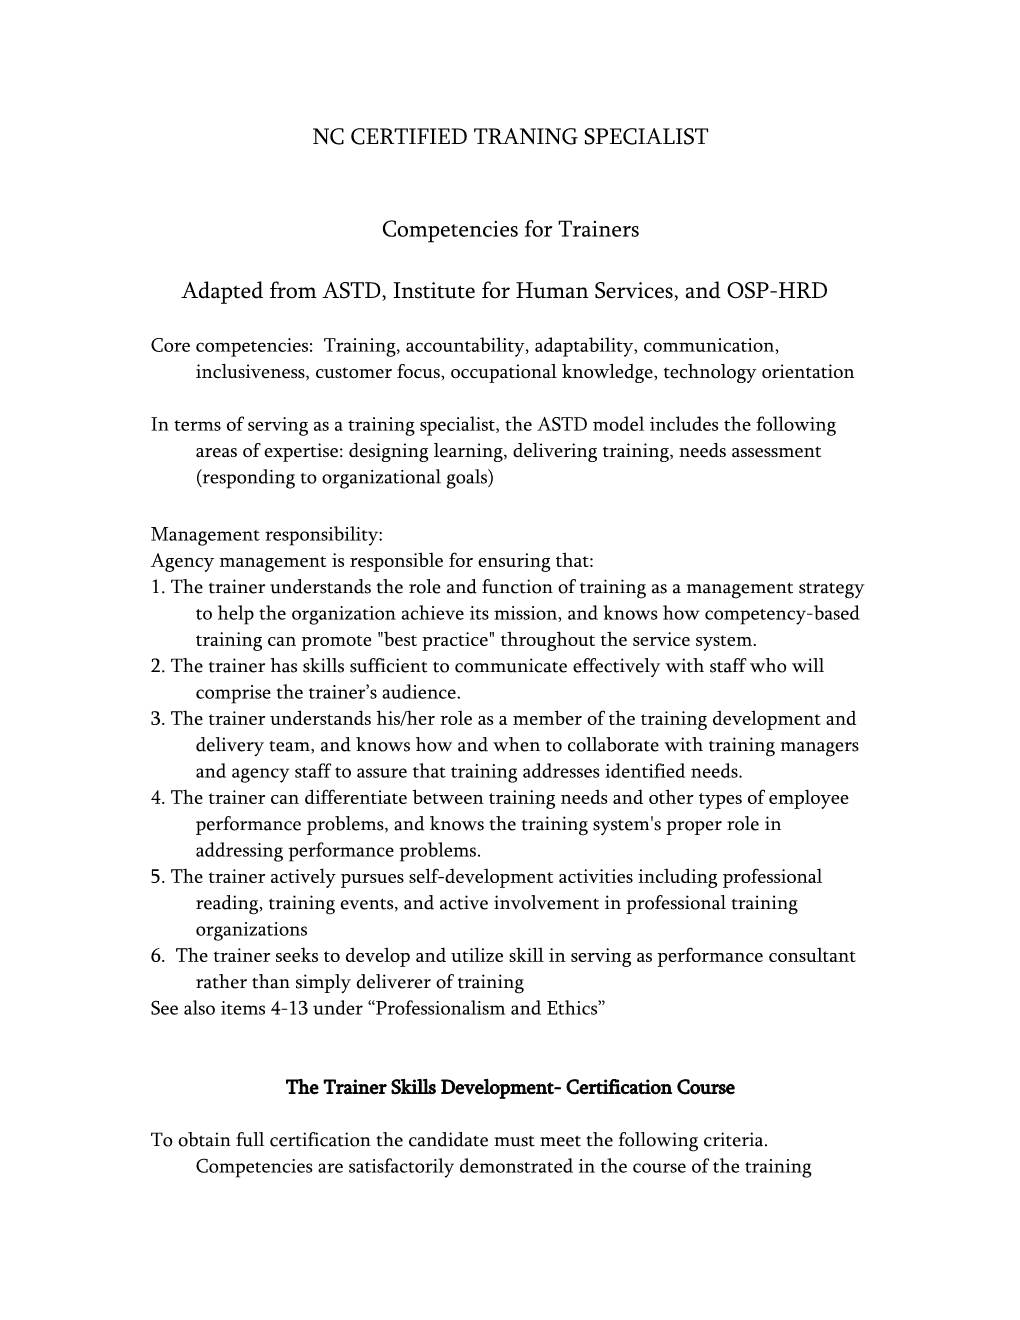 Competencies for Trainers